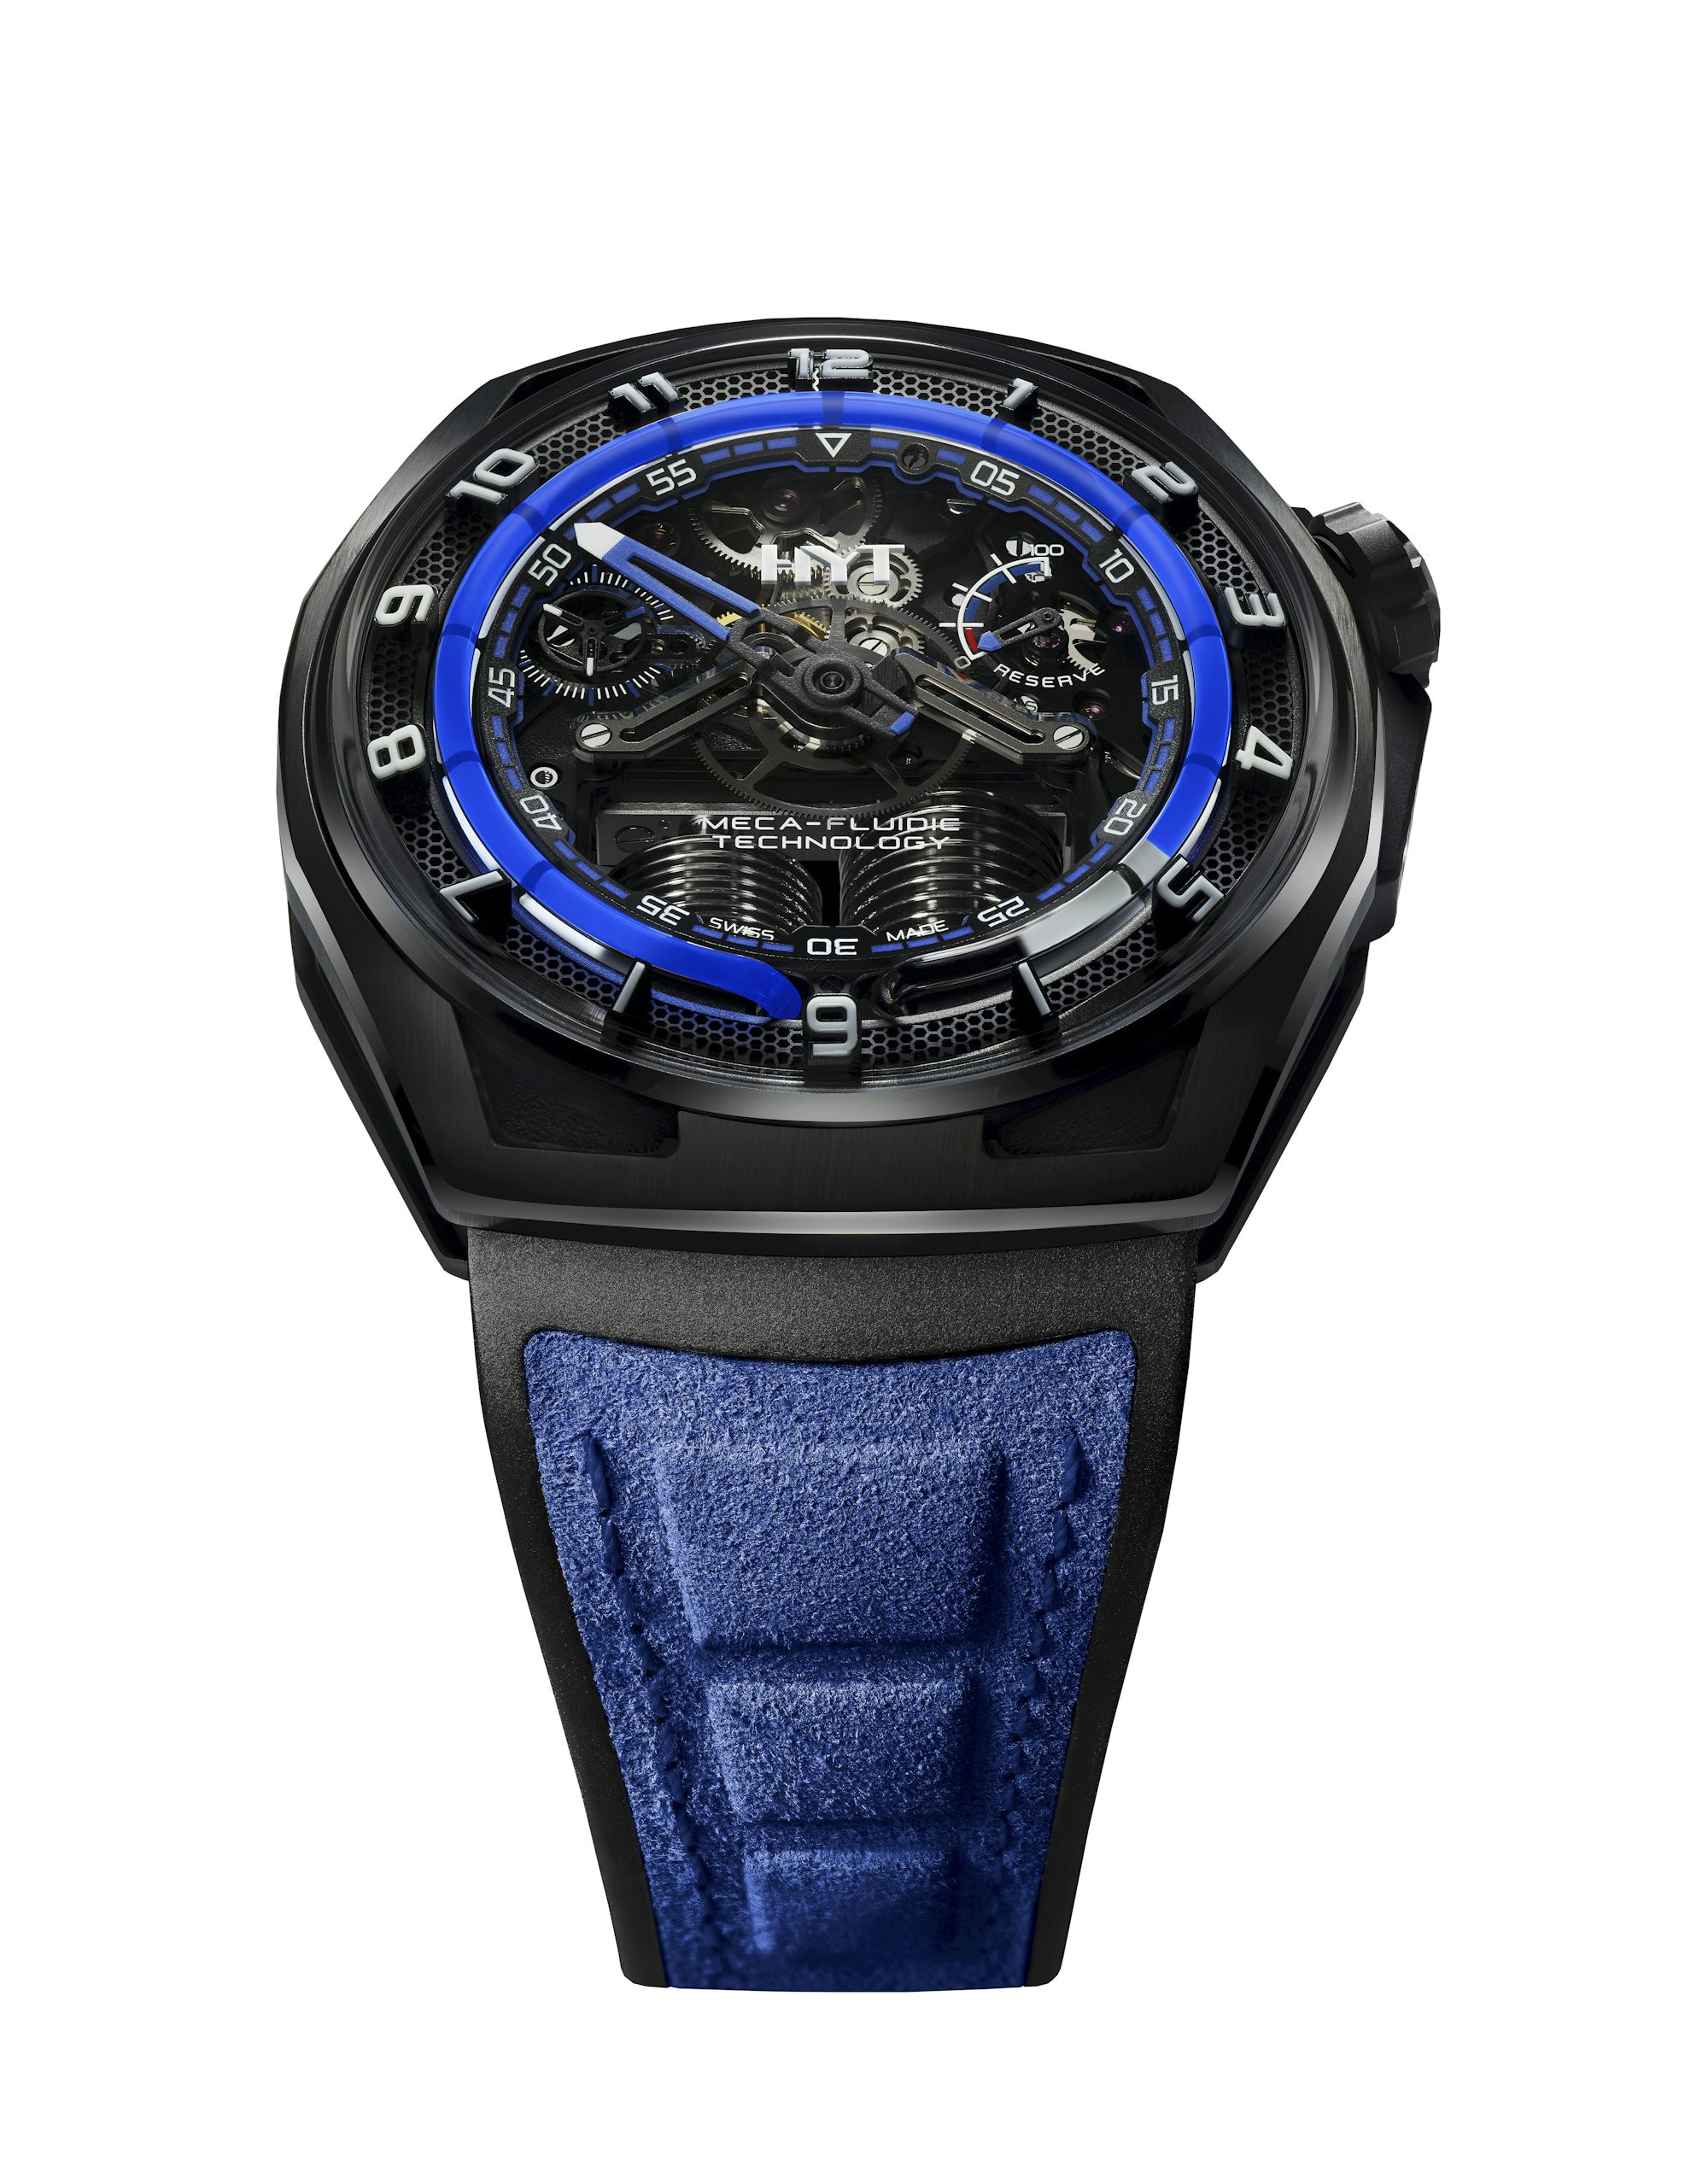 A futuristic liquid display watch in a bright blue with Alcantara and rubber strap viewed from the side.